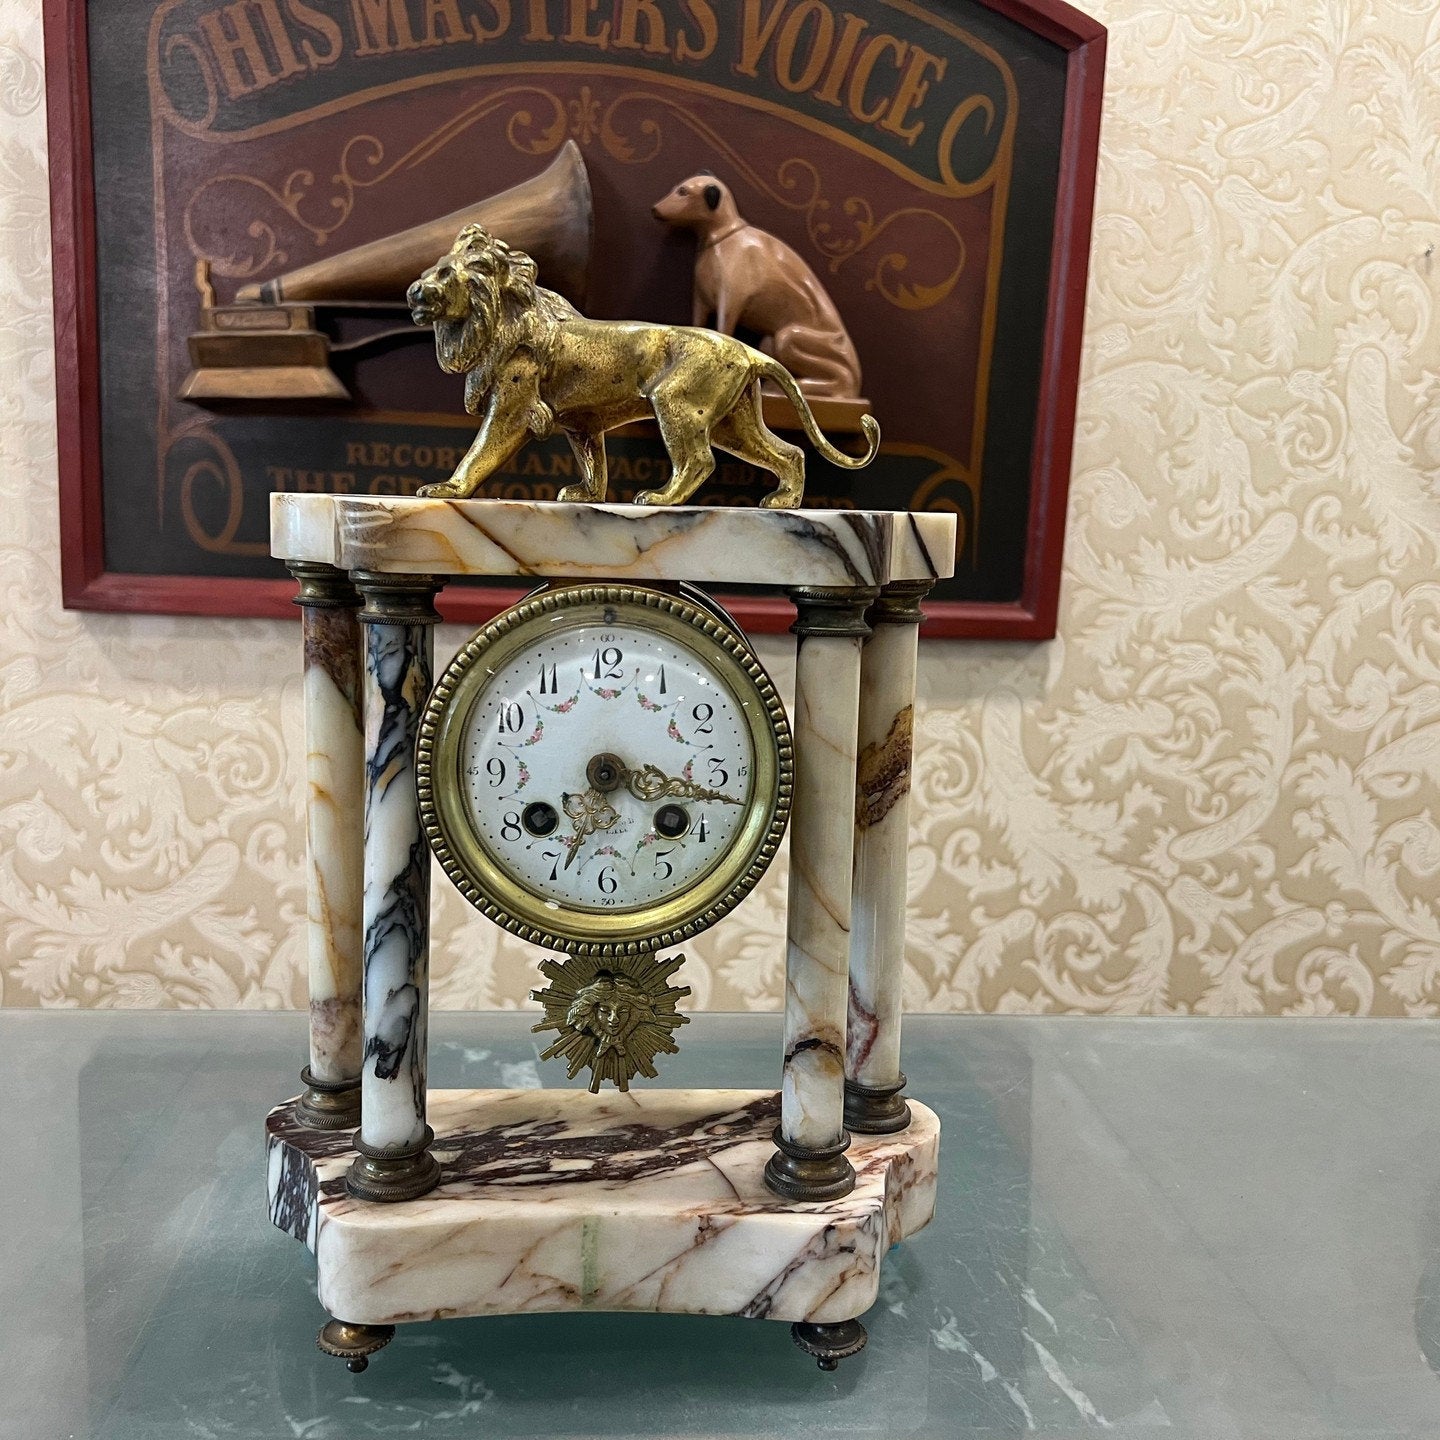 Antique French Marble Base Mantel Clock with Lion Figurine - Exquisite Collectible